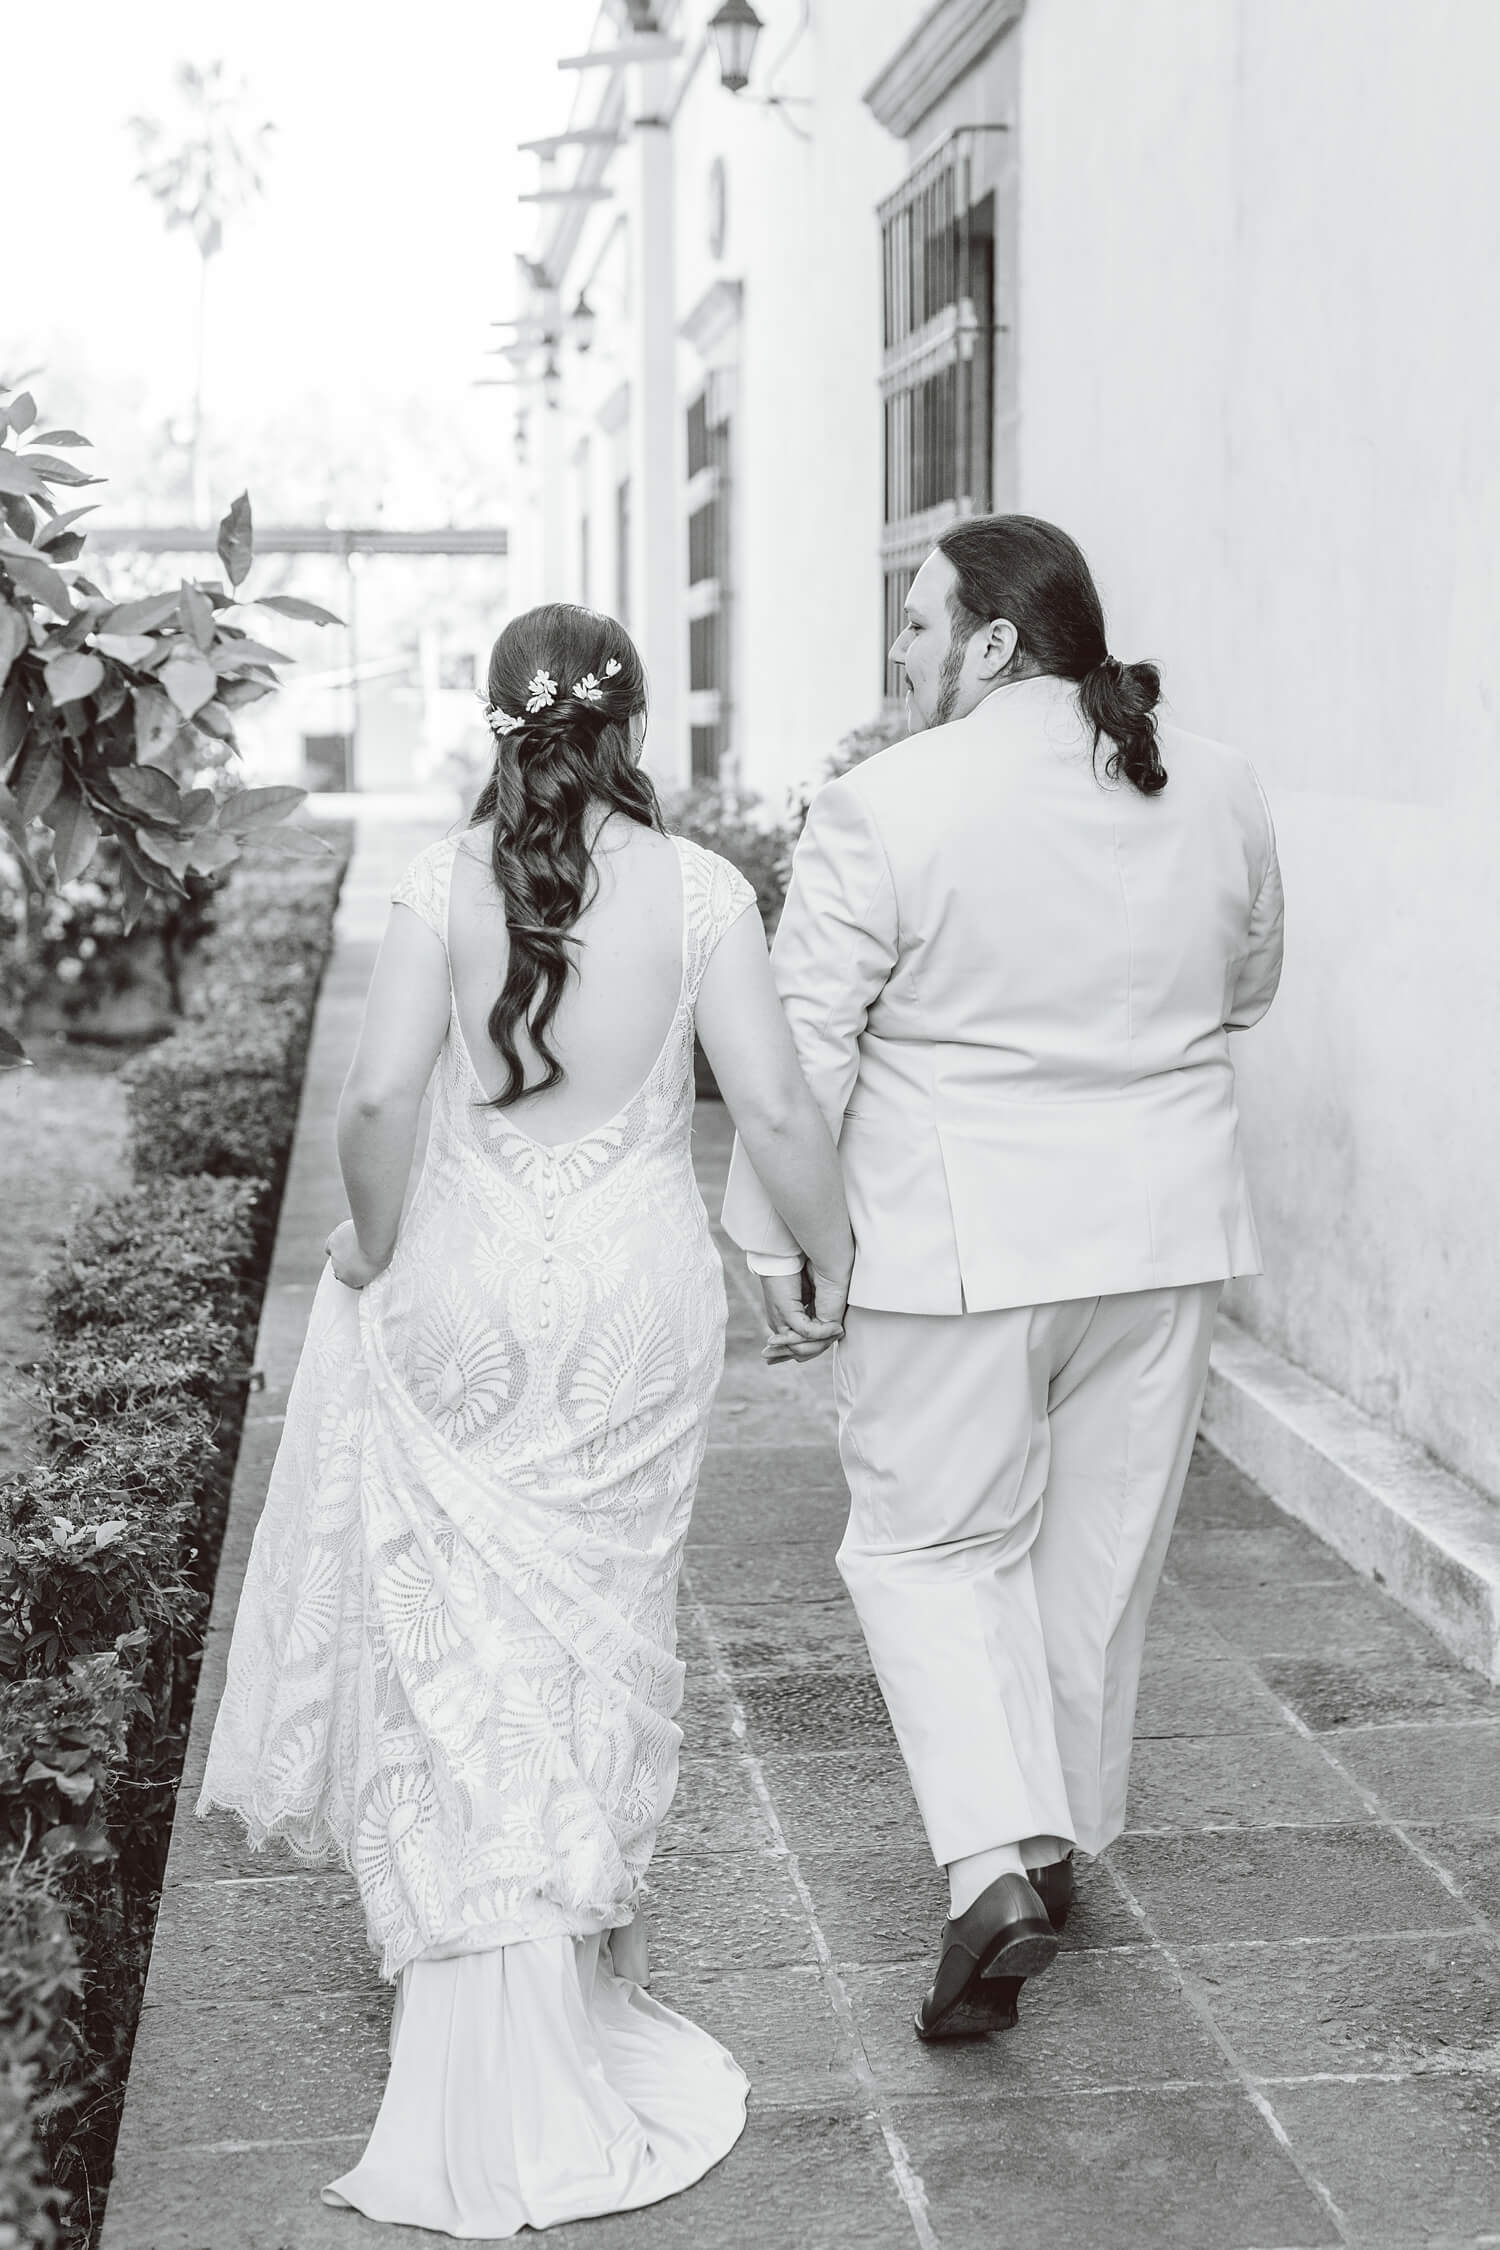 Bride and groom holding hands and walking | Brooke Michelle Photo